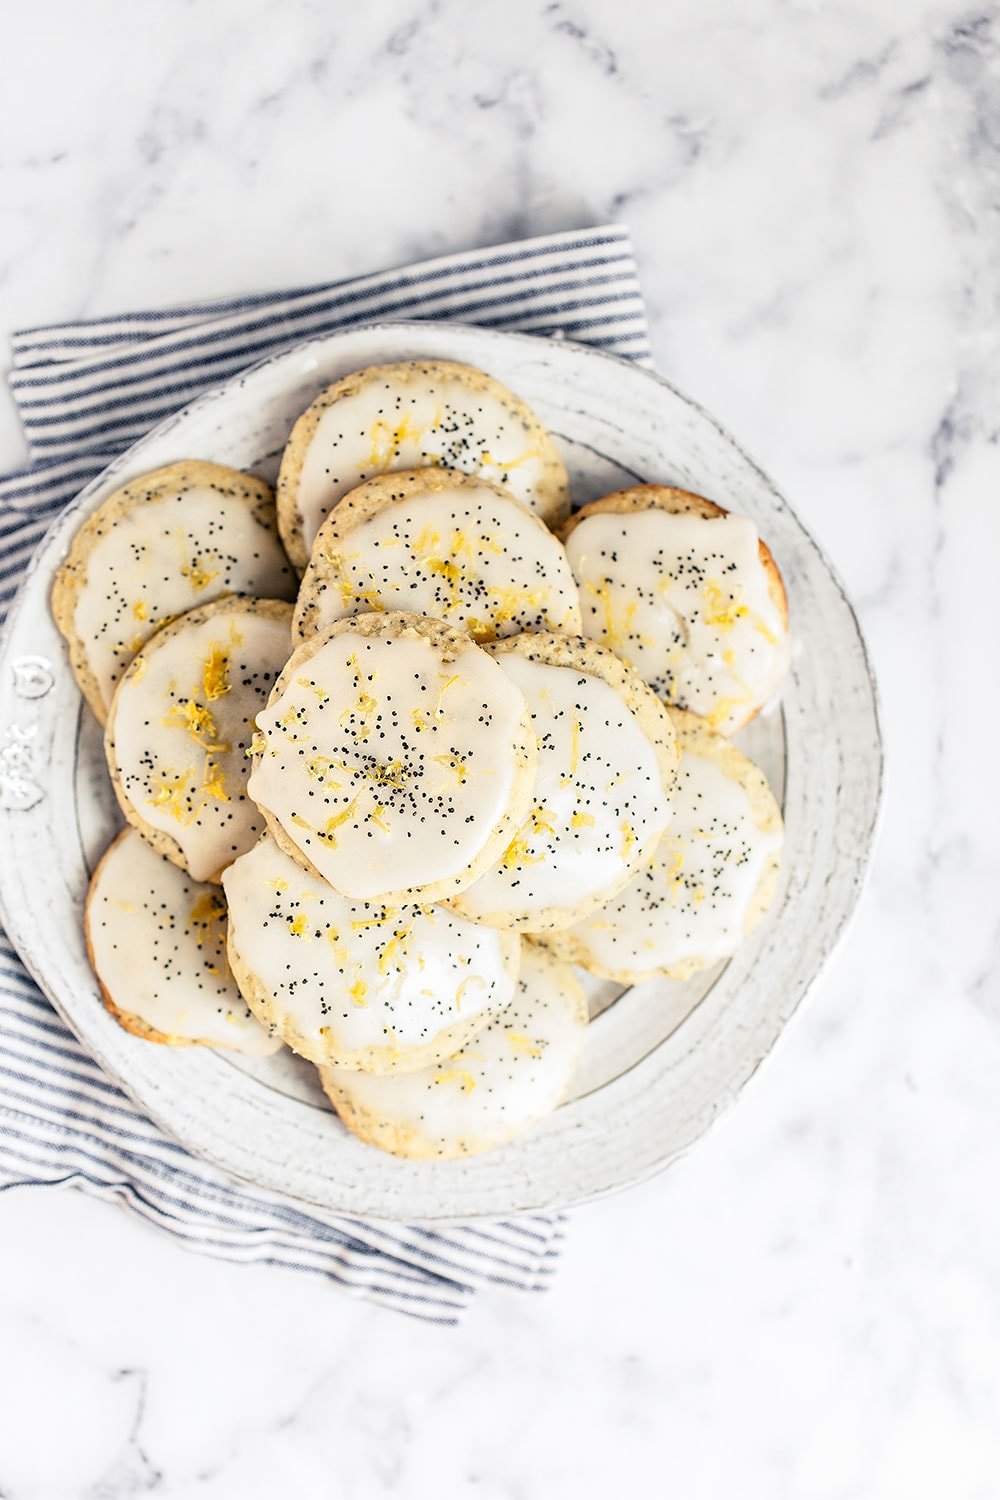 Beautifully bright and refreshing, these Soft Batch Lemon Poppy Seed Cookies are crazy tender and loaded with fresh lemon flavor. Perfect summer cookie!